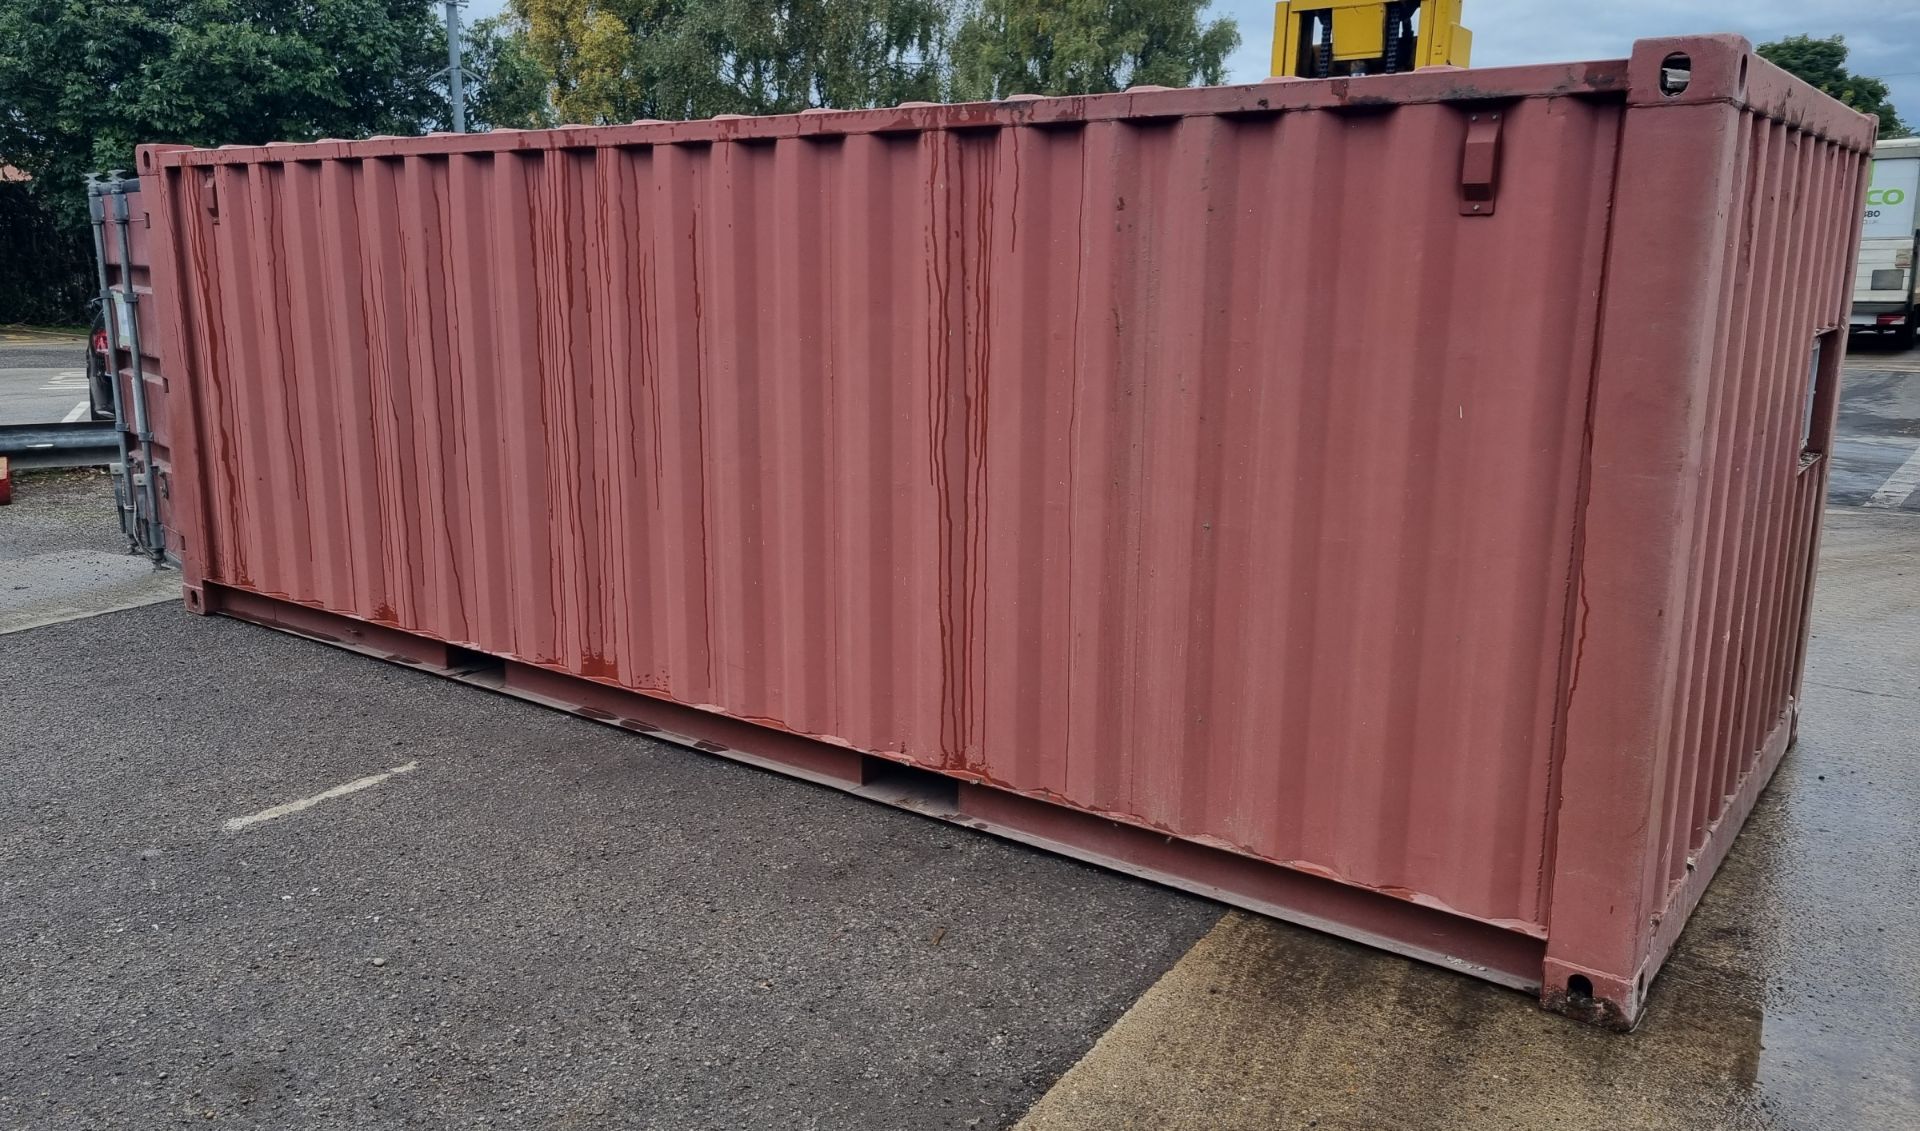 Stonehaven Engineering Ltd transportable storage container ISO 499/99/01 - dimensions: 20ft x 8ft x - Image 3 of 6